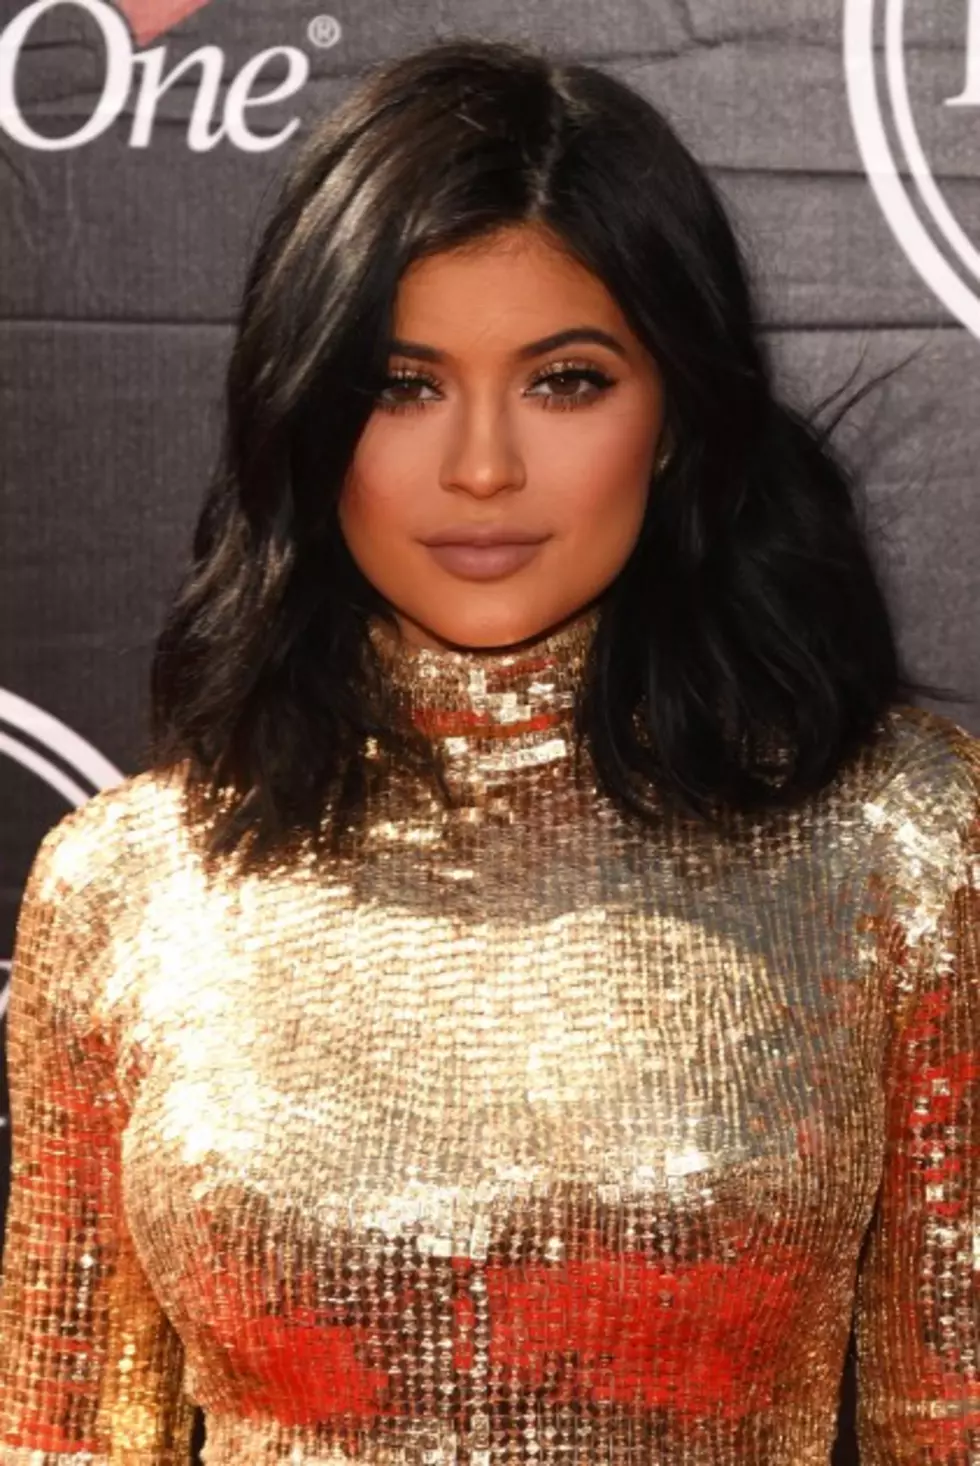 Kylie Jenner Paid $200k To Do This On Her Birthday